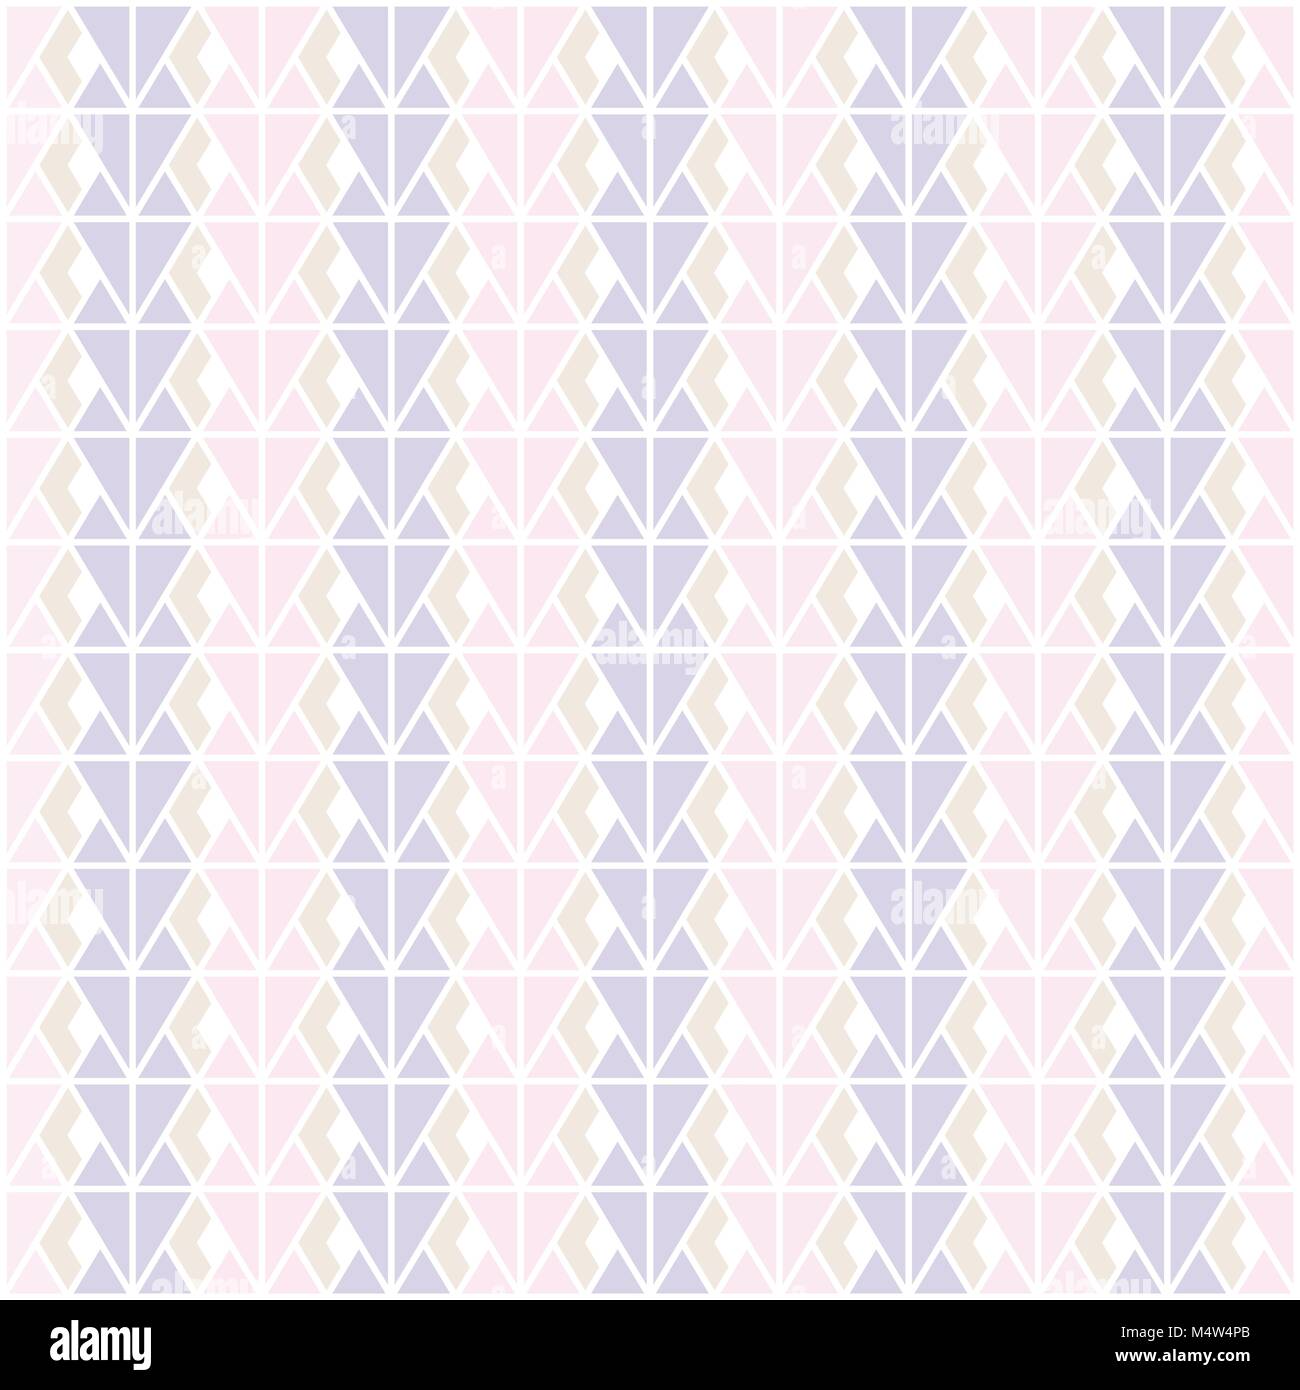 Geometric pattern of purple and pink colors with white lines and gray shadow. Vector illustration. Stock Vector